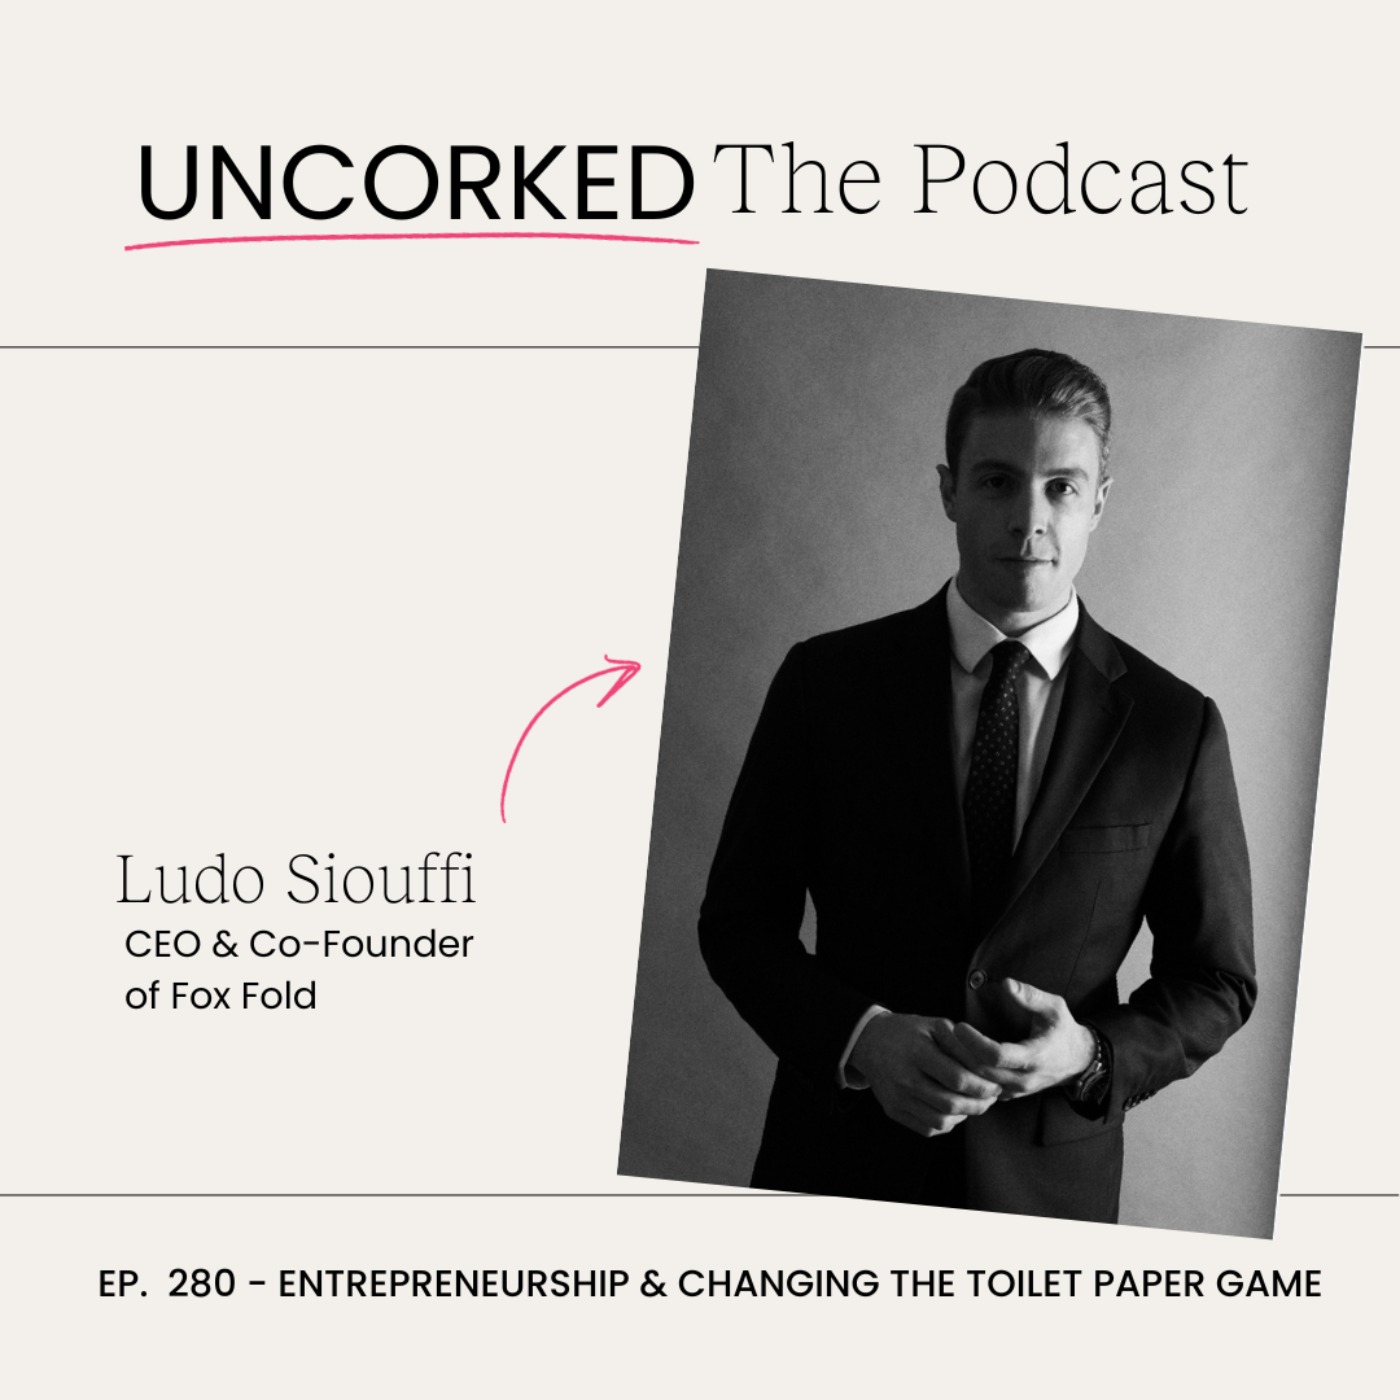 Entrepreneurship & Changing the Toilet Paper Game with Ludo Siouffi